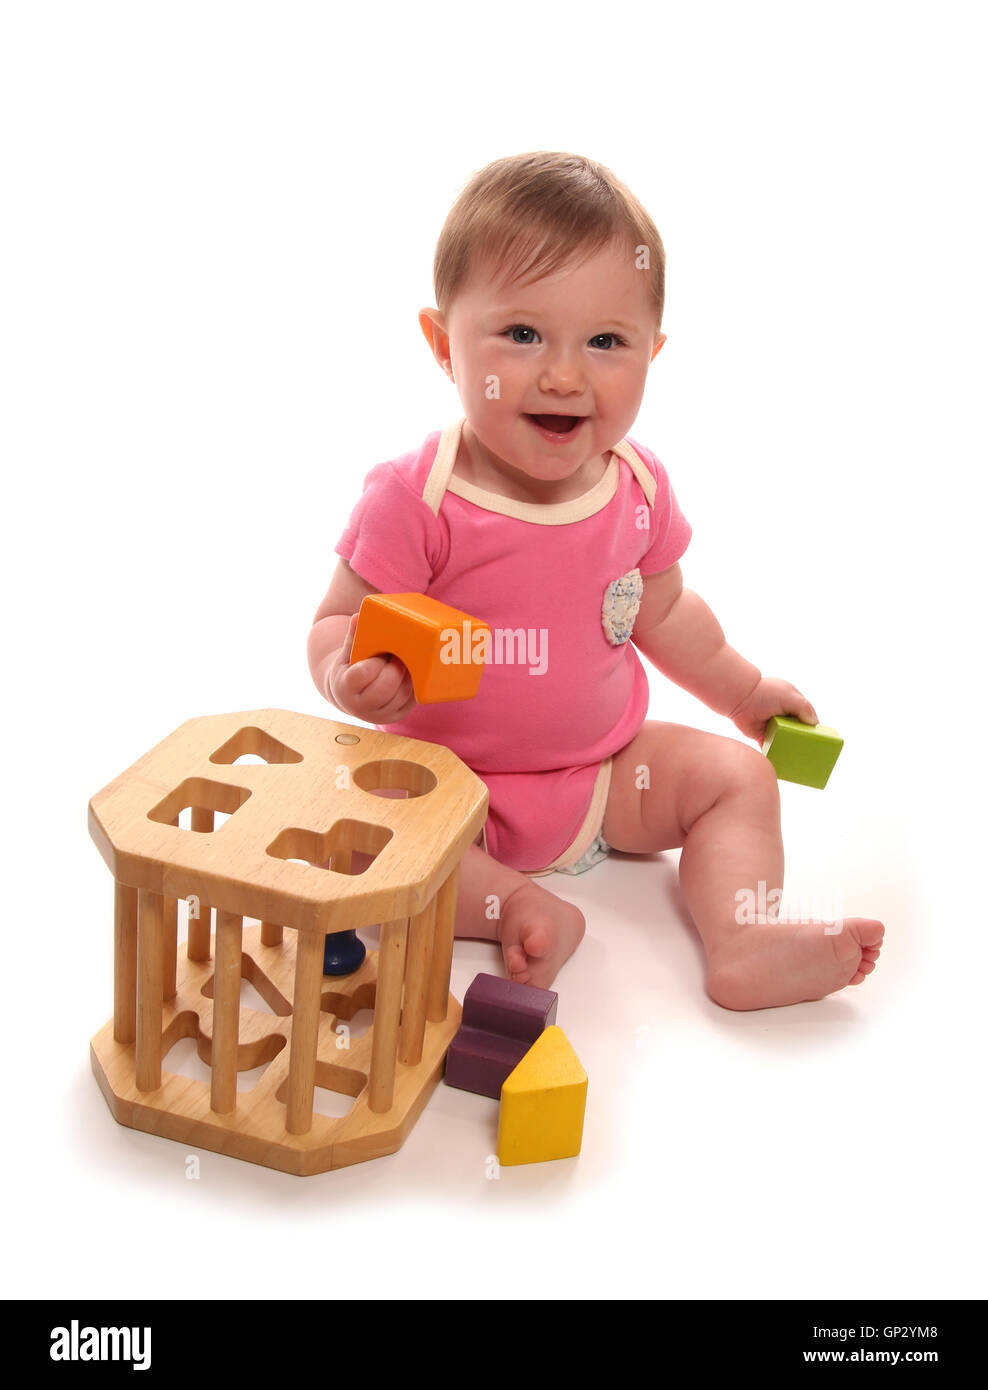 Baby girl playing with wooden shape sorter cutout Stock Photo